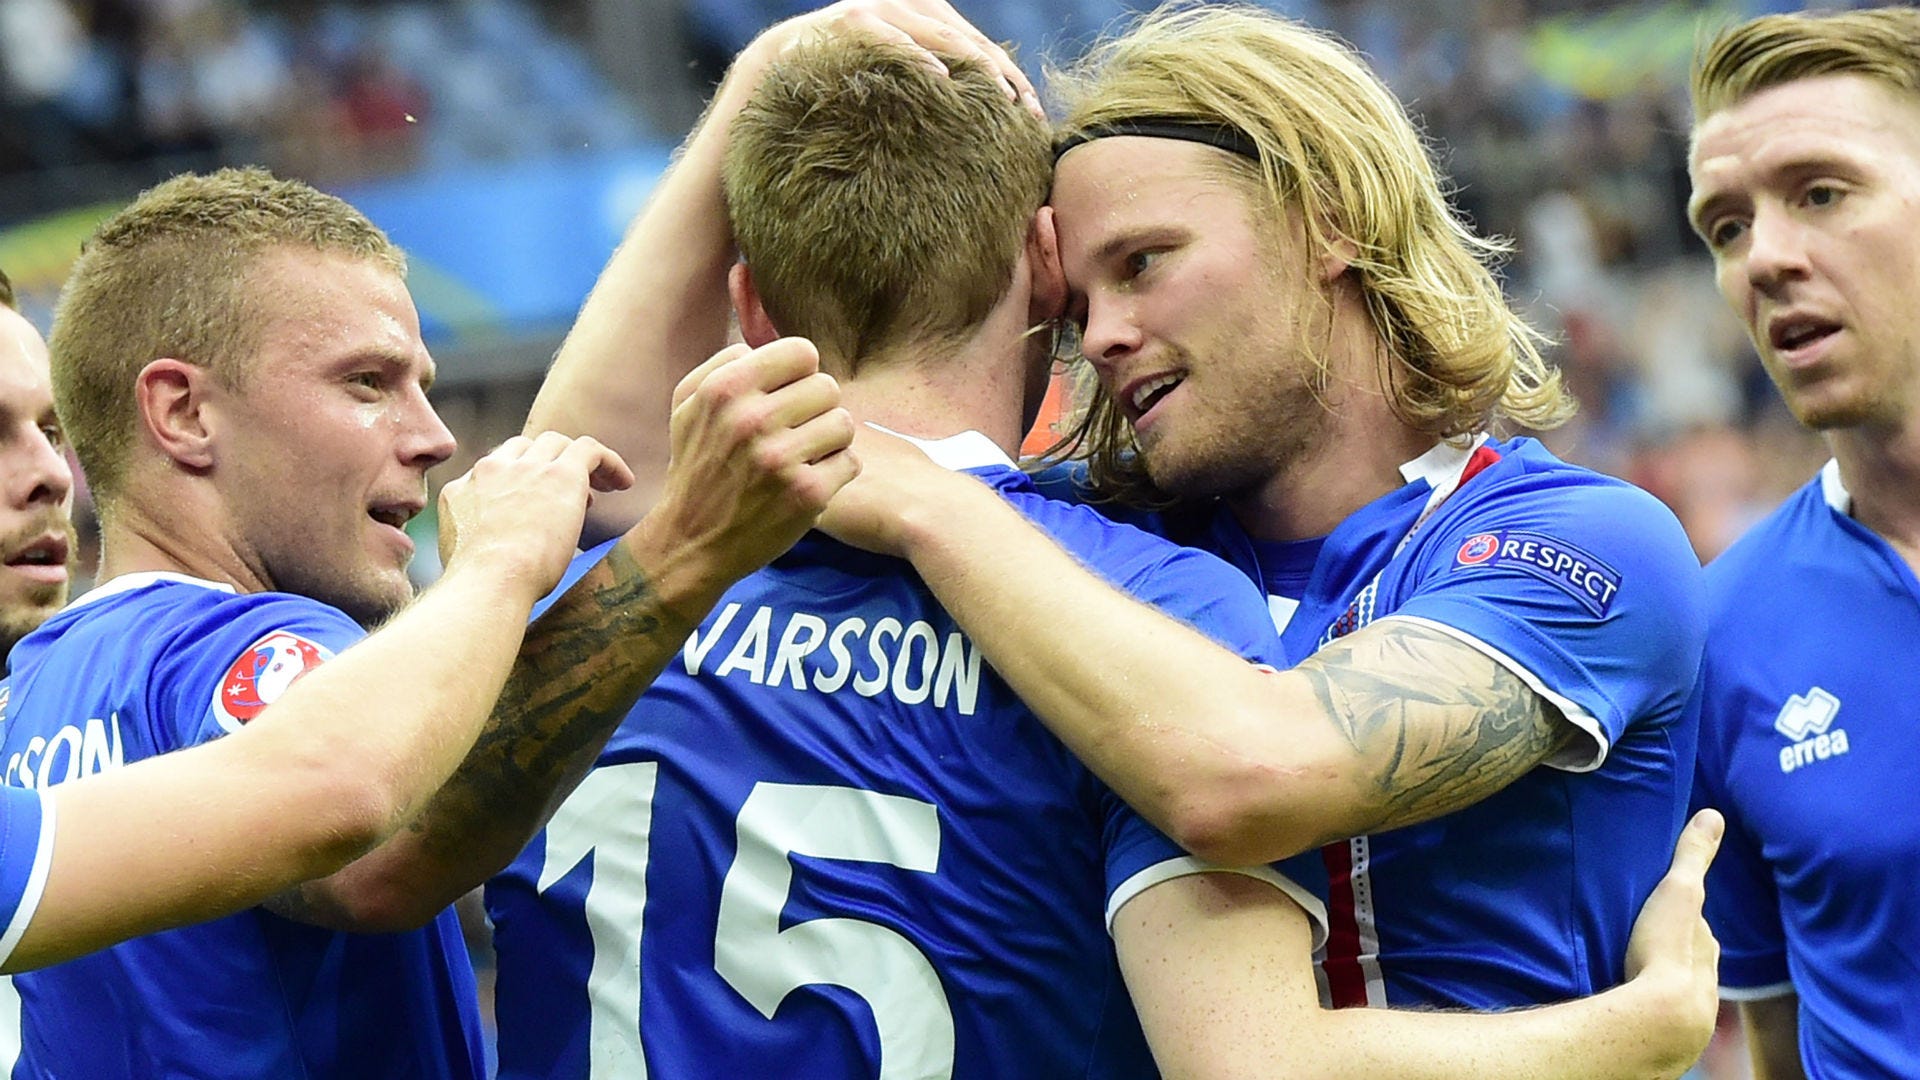 How Did A Nation Of 330 000 People Qualify For Euro 16 The Secret Behind The Iceland Miracle Goal Com Us